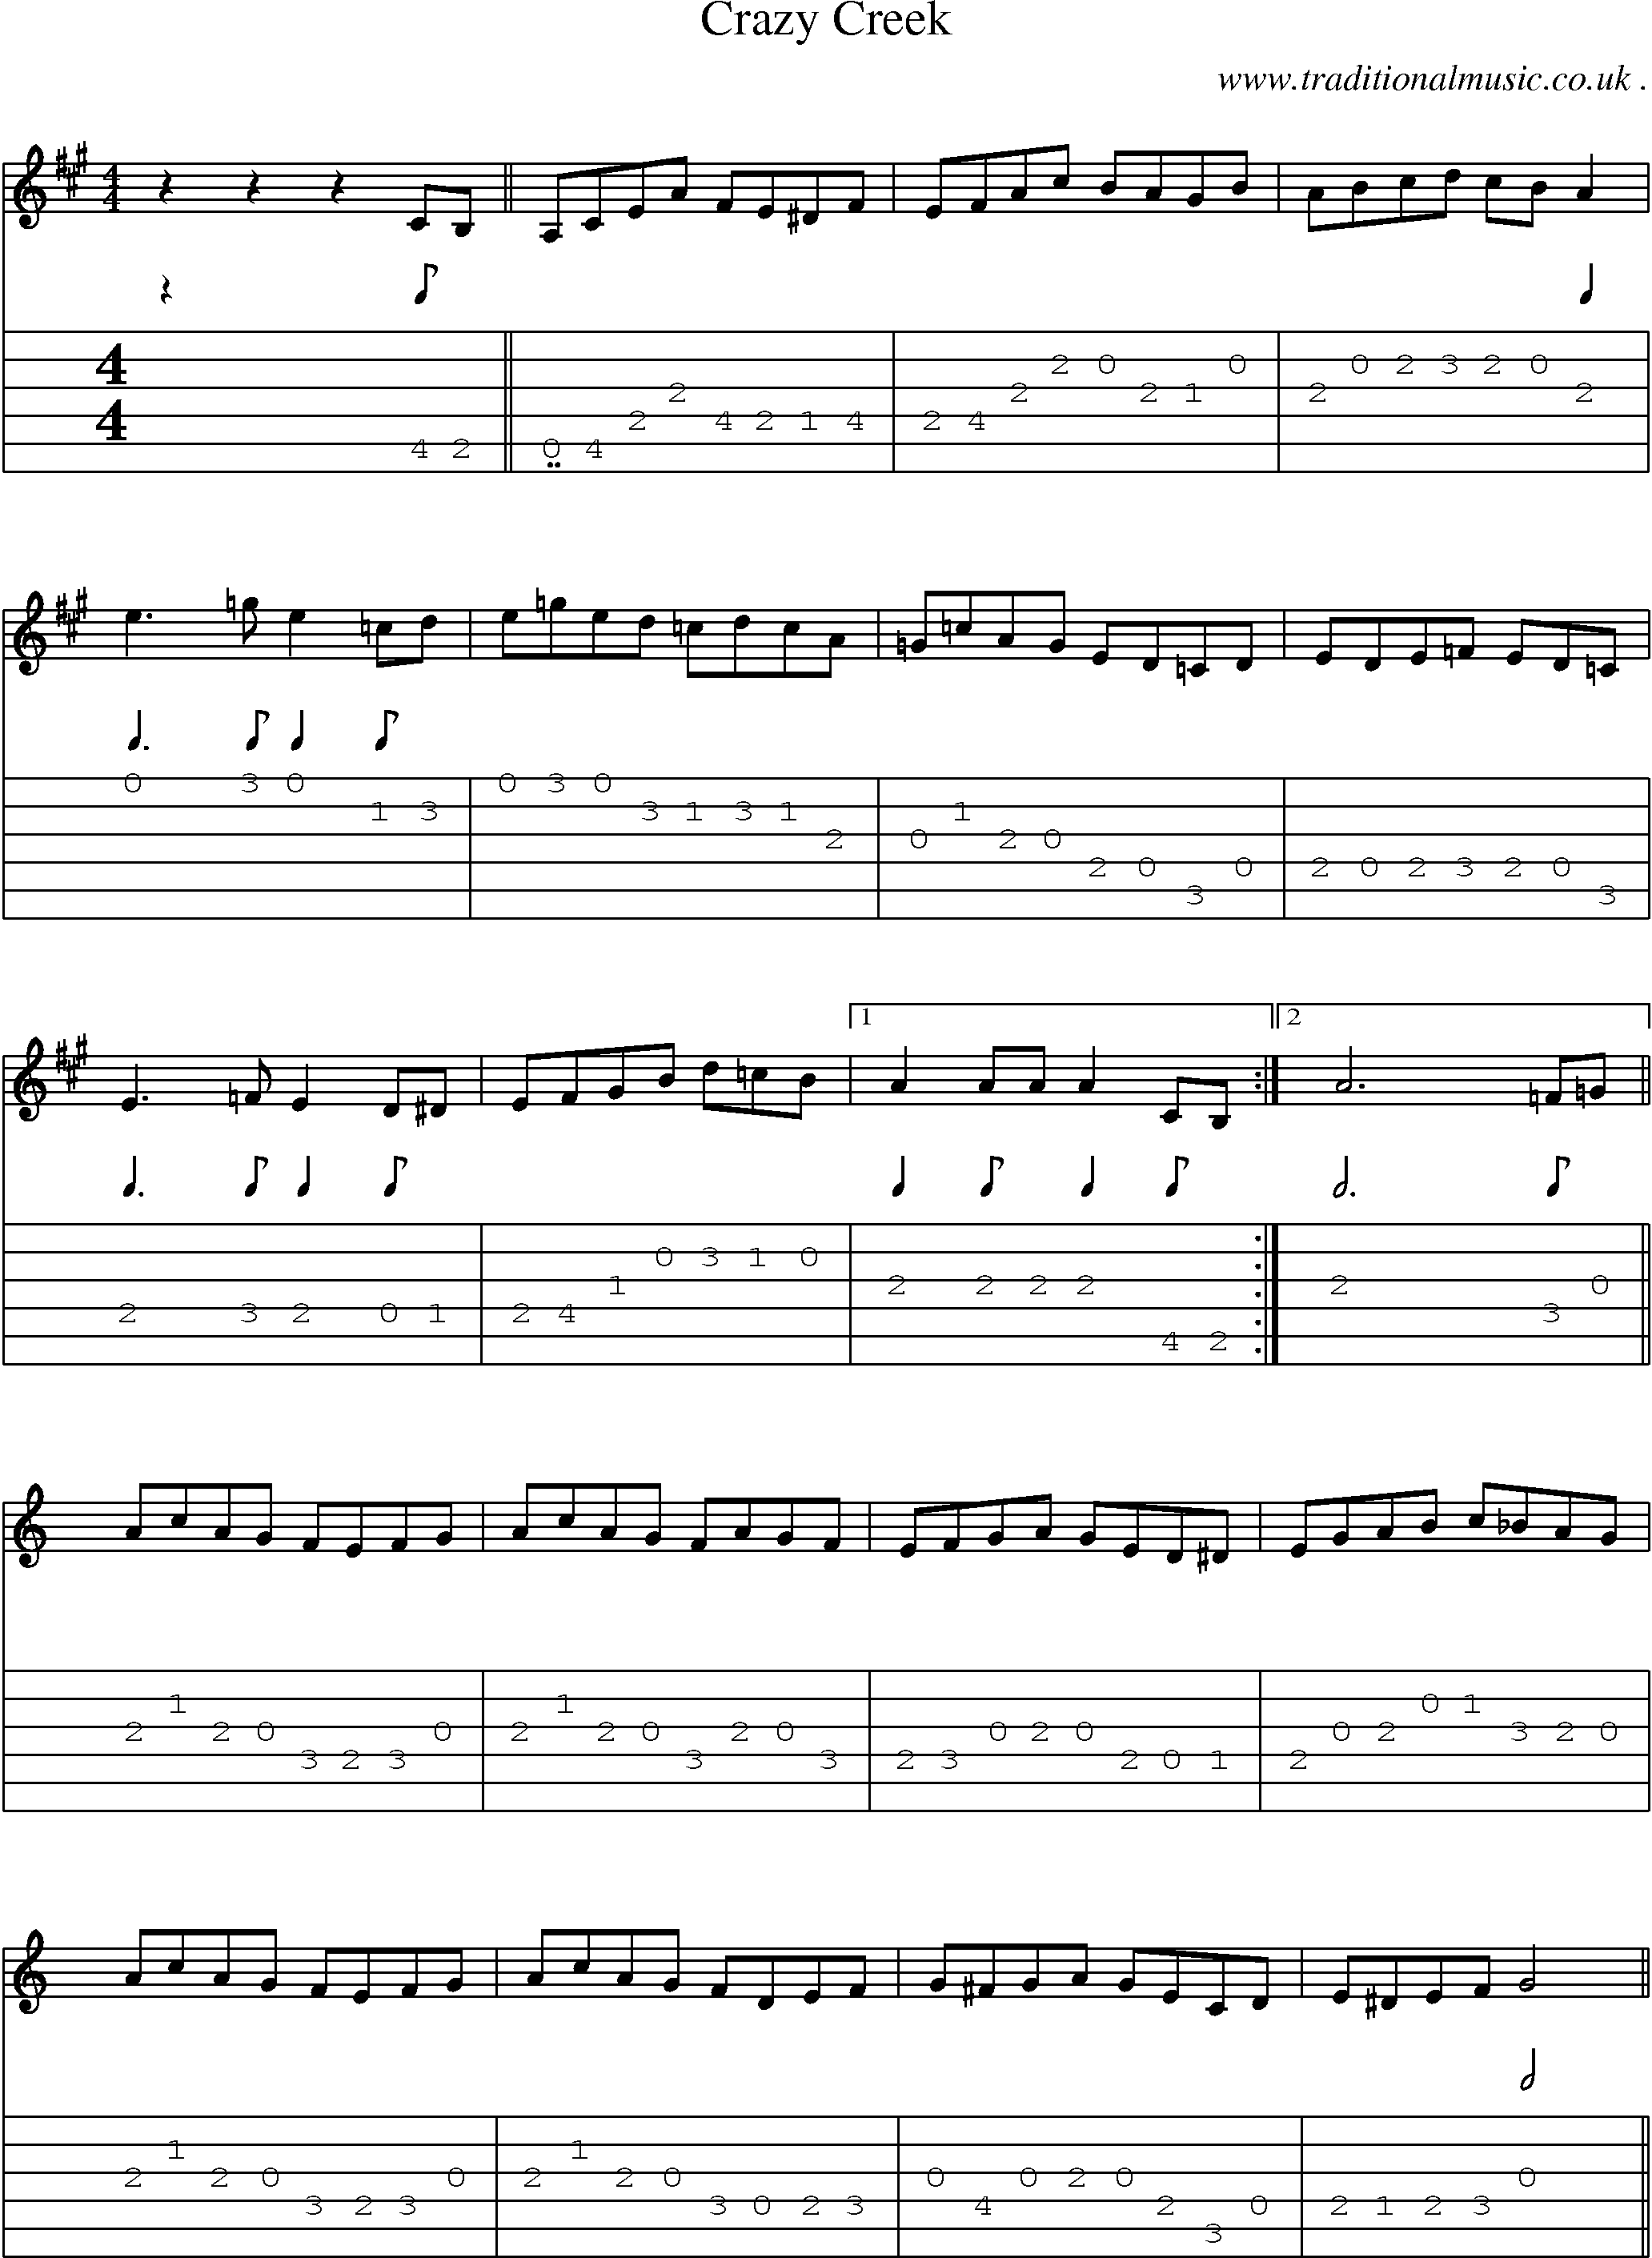 Music Score and Guitar Tabs for Crazy Creek